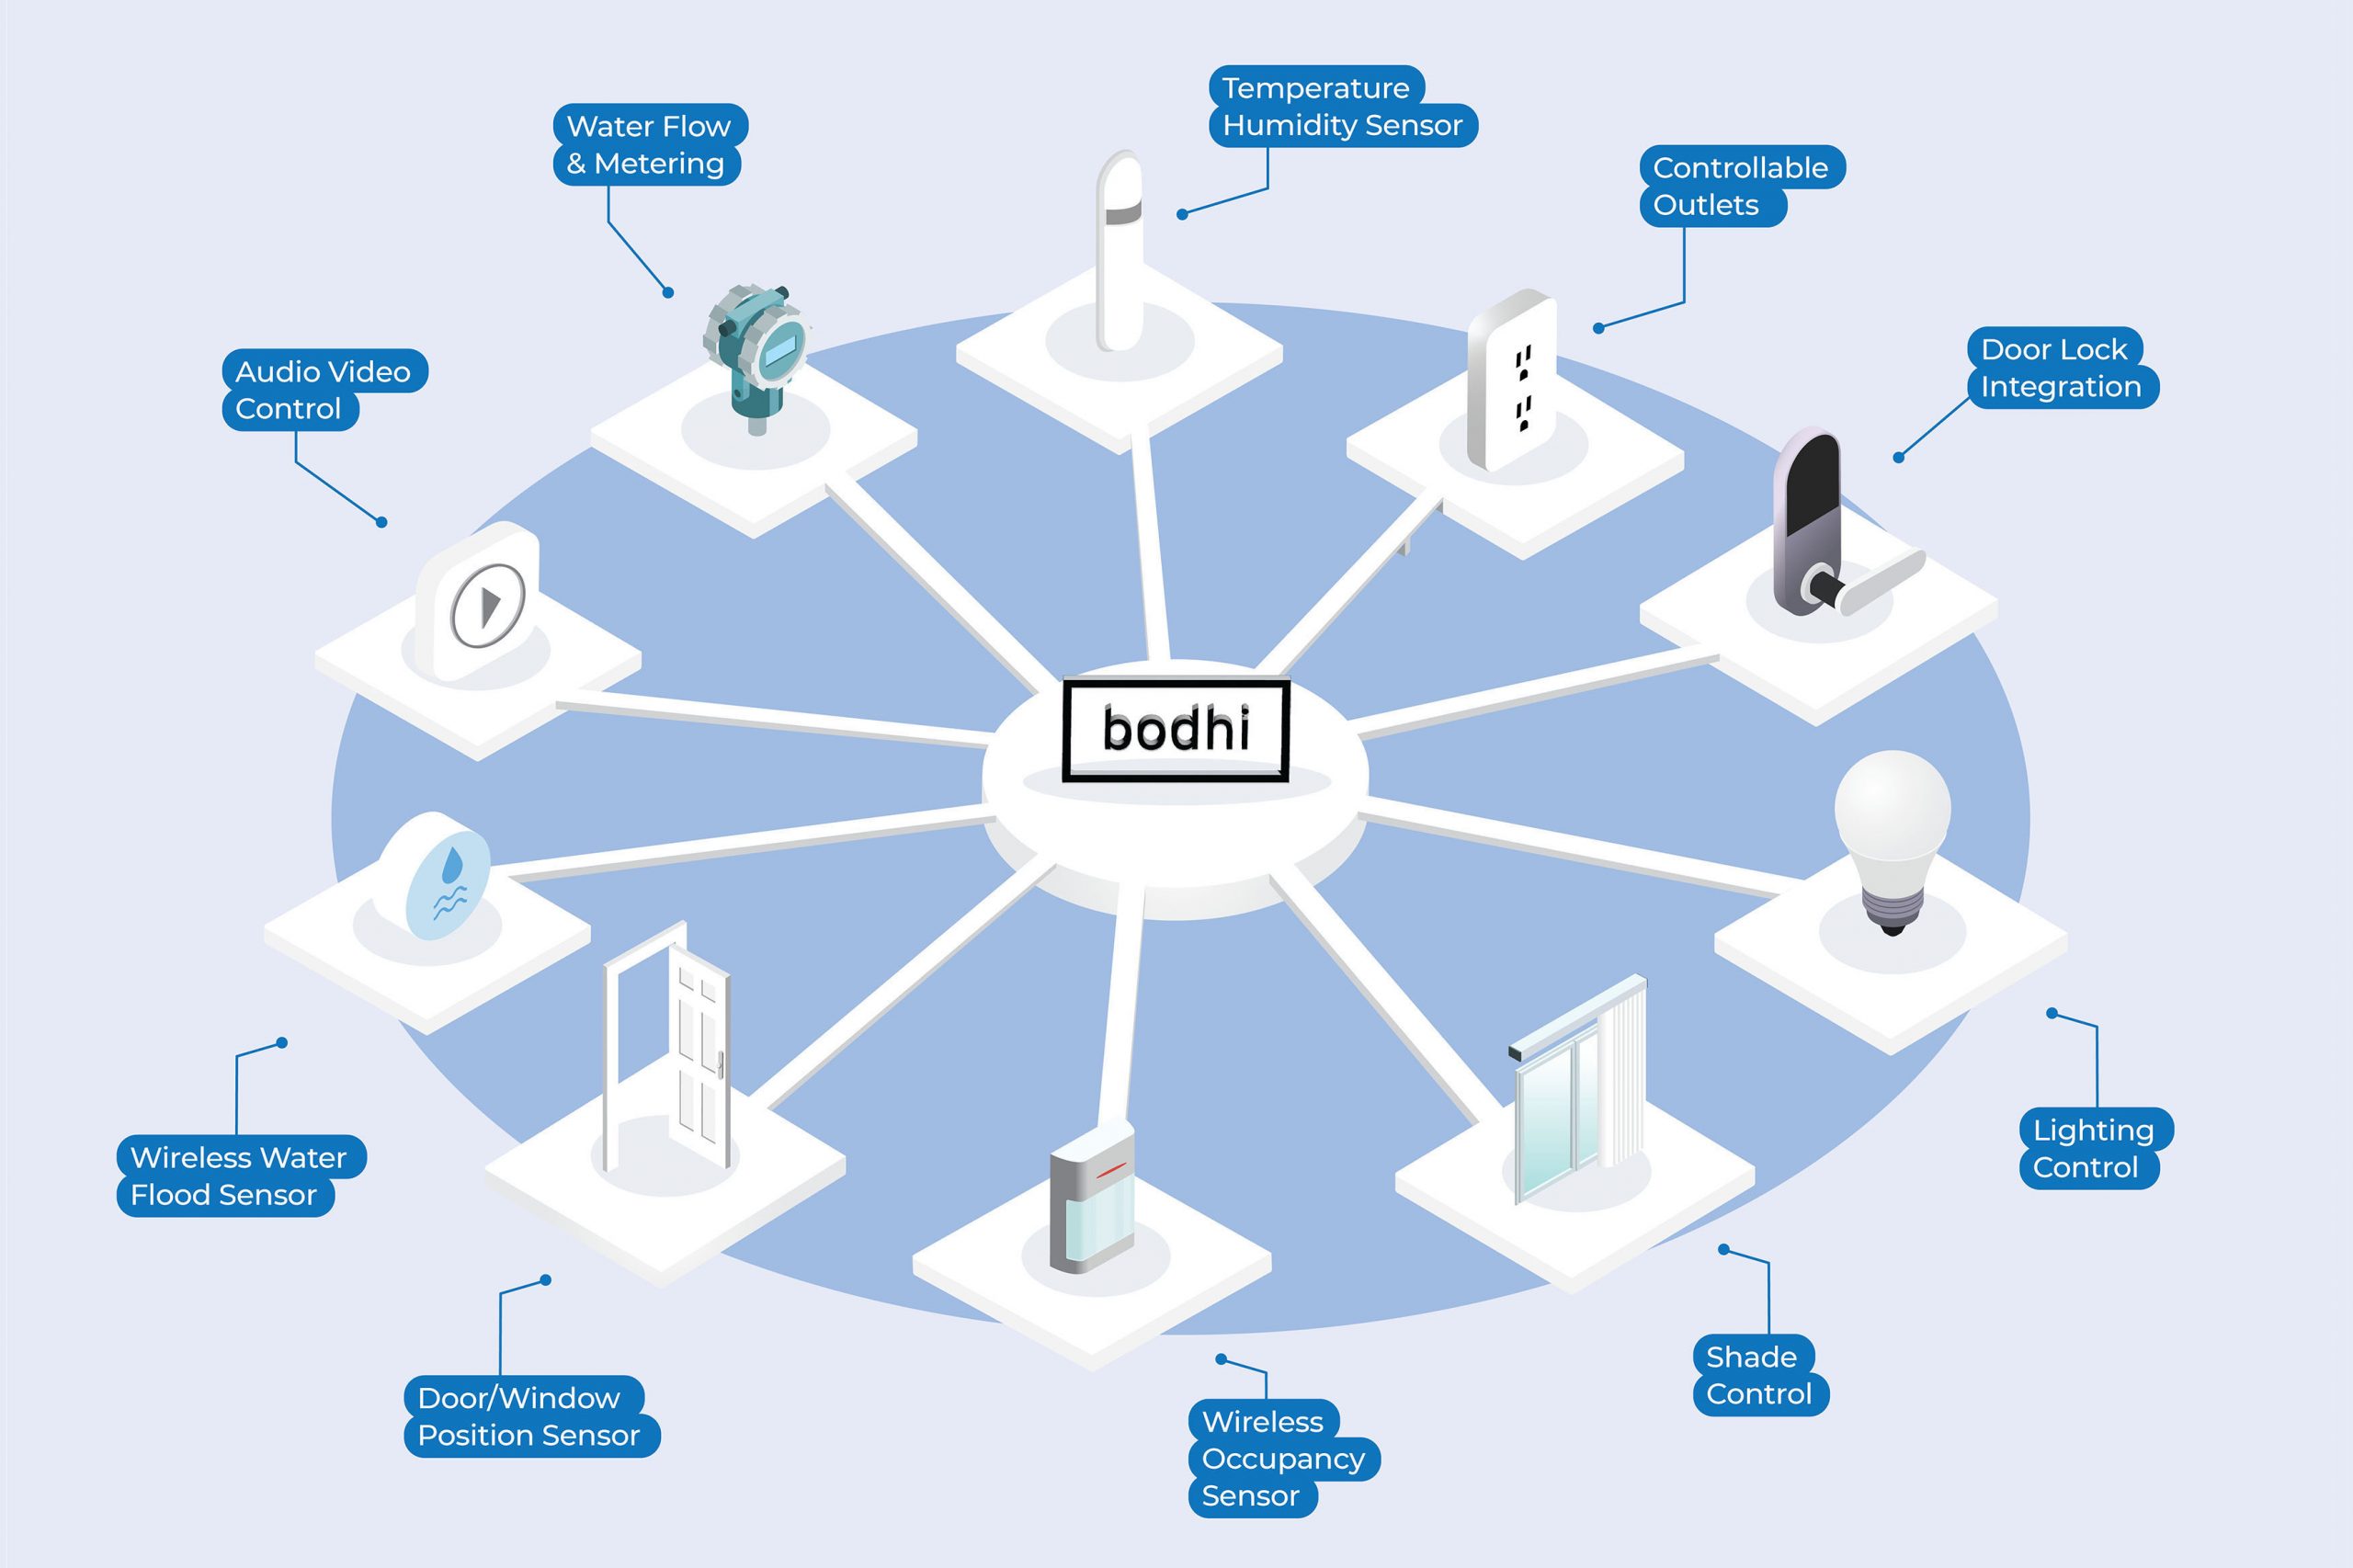 Bodhi is a bridge connecting the various technologies on your property, including HVAC, lighting, shading, access control, air quality, and flood and leak mitigation systems.